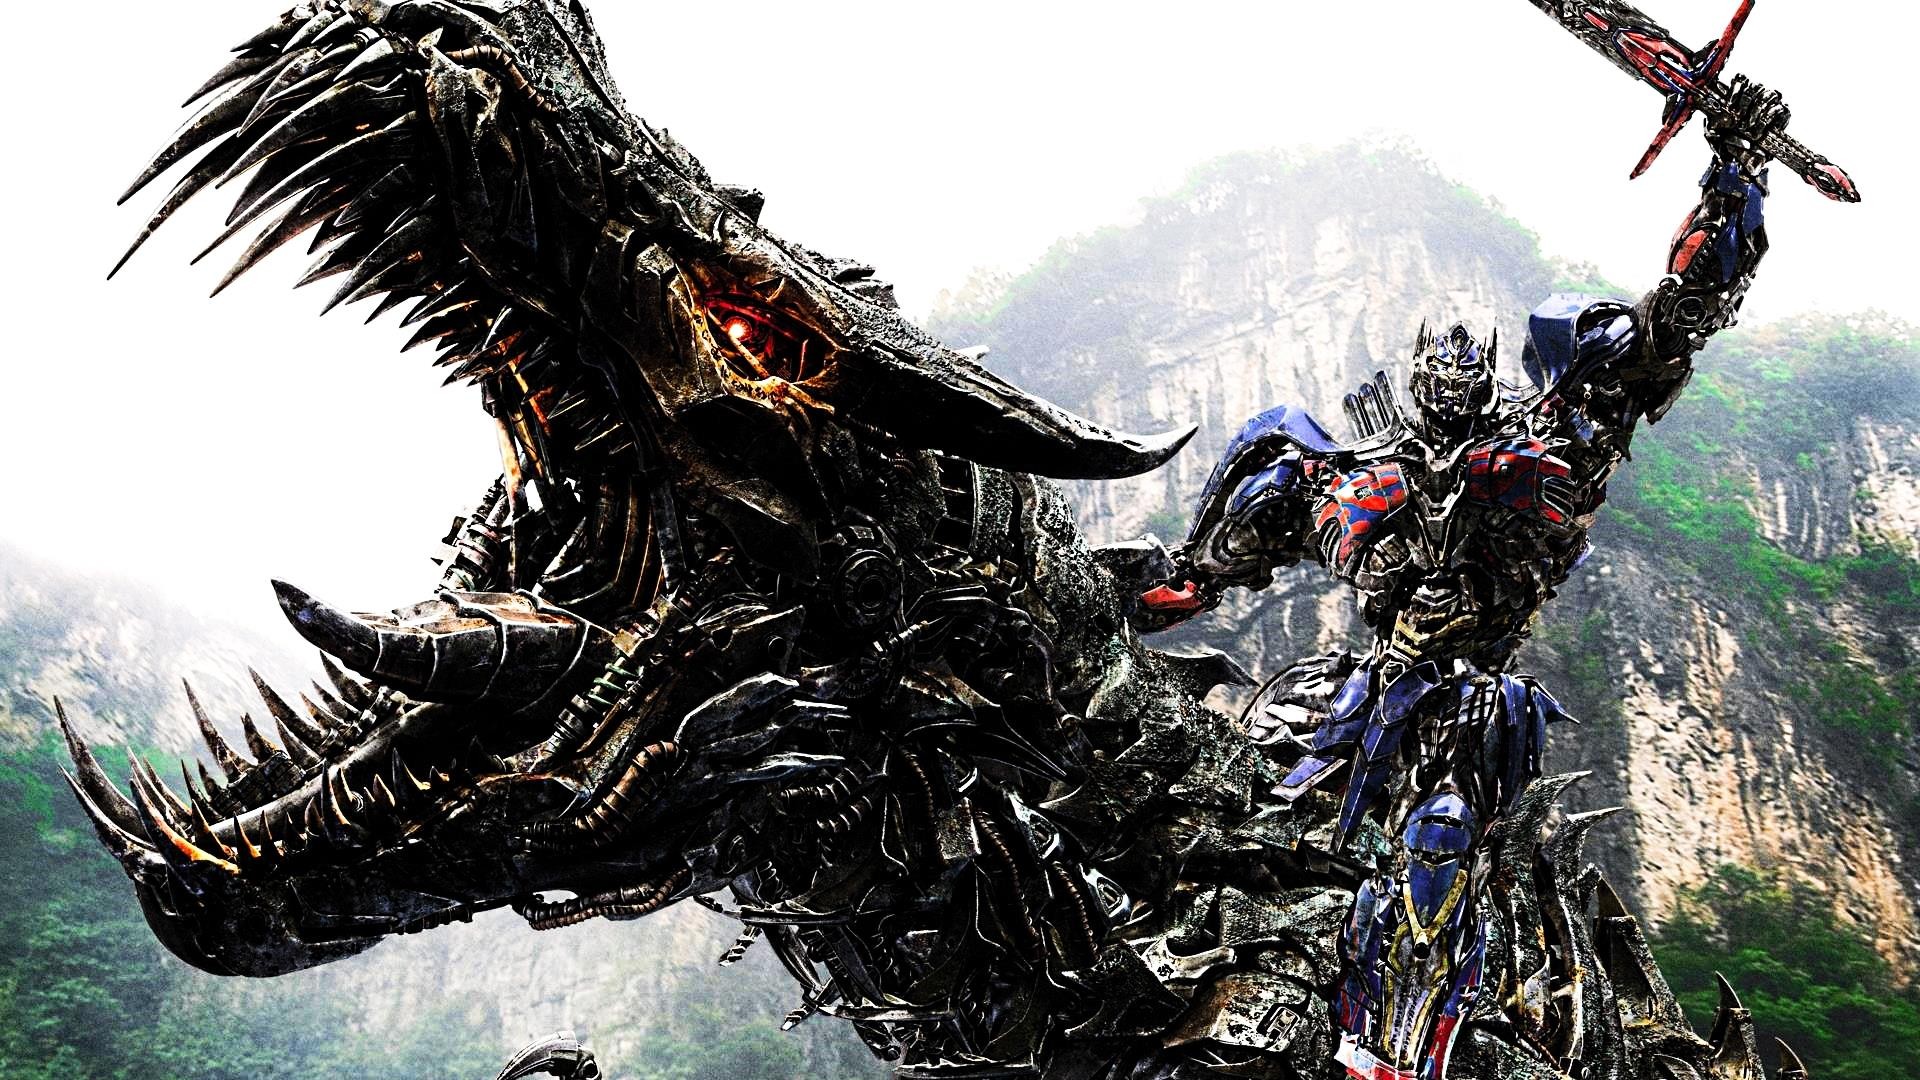 General 1920x1080 Optimus Prime Transformers science fiction robot movies